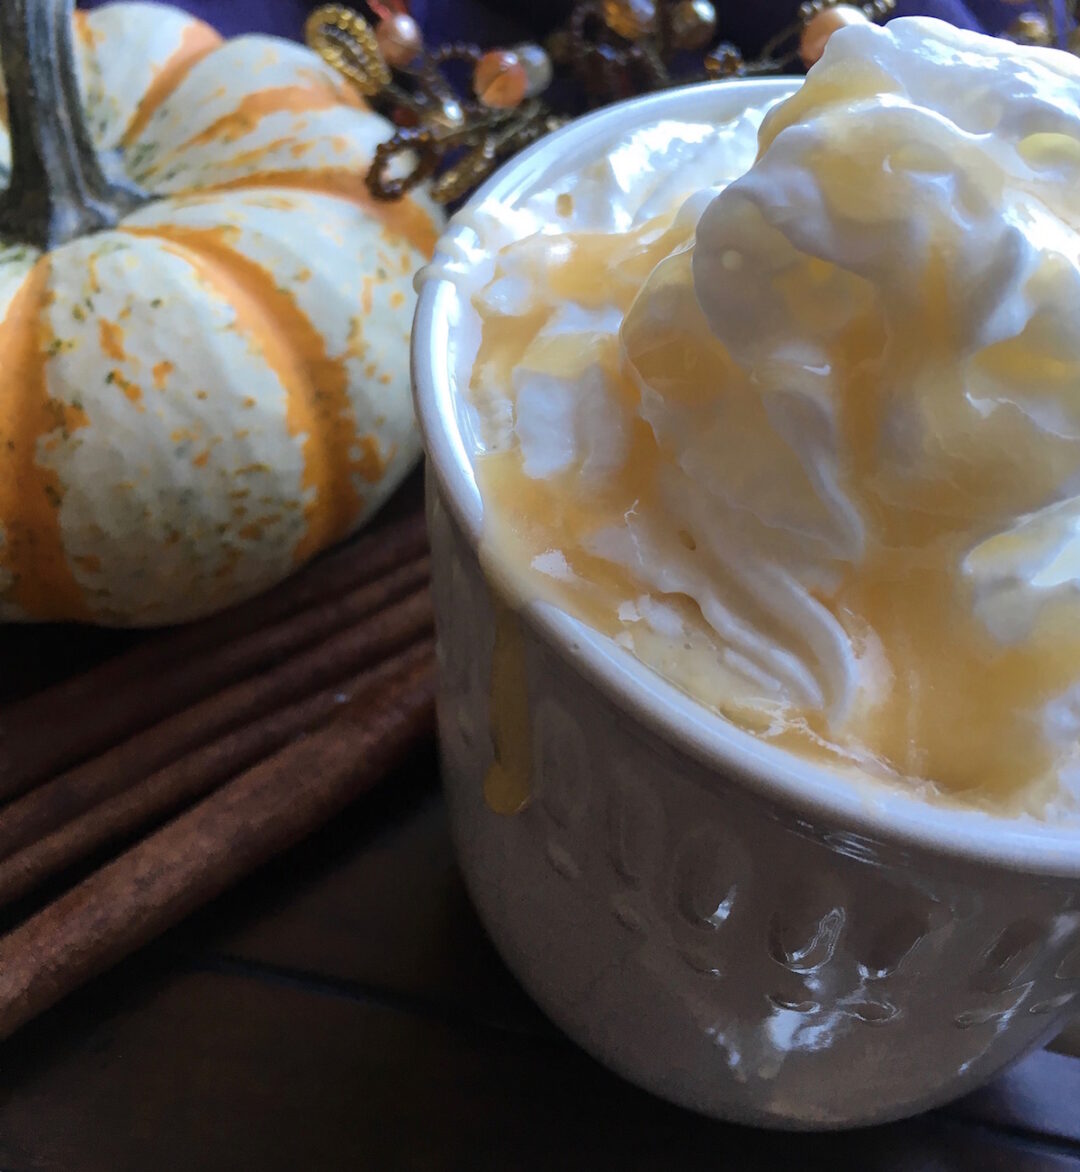 Crockpot Caramel Cider with Maple Whipped Cream